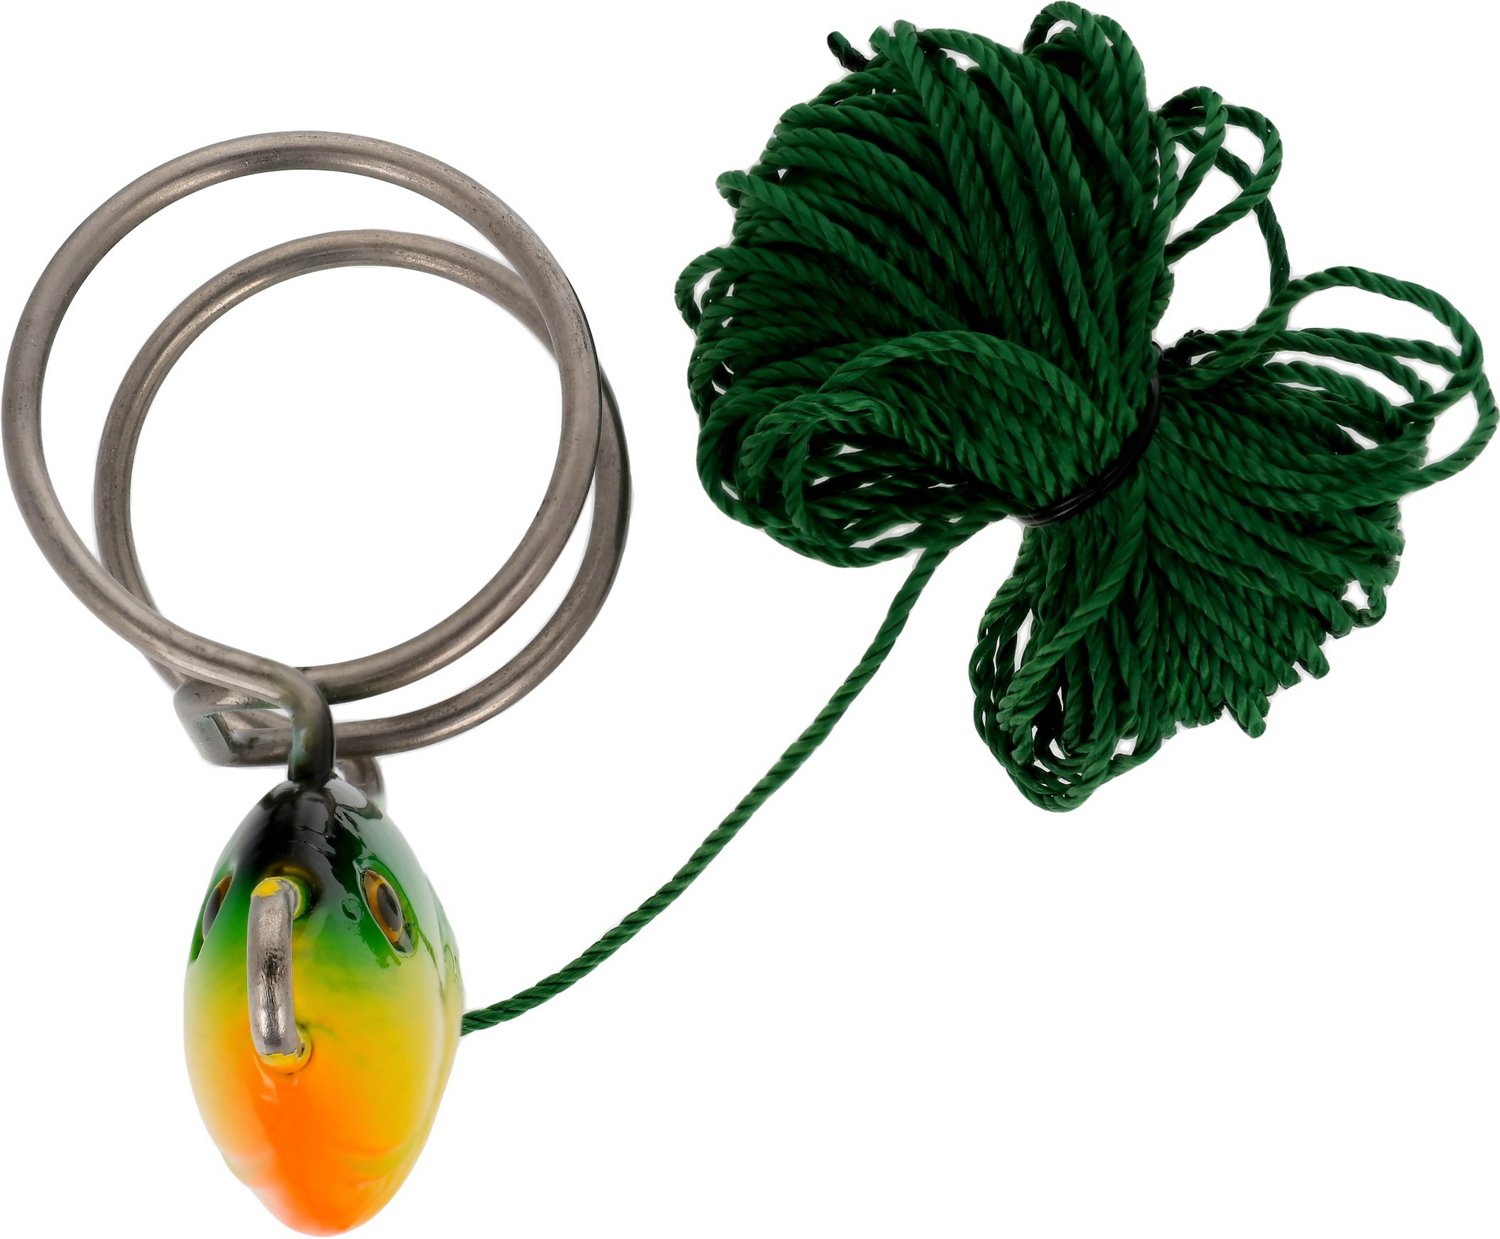 Item # 6351 (Ended 2024-03-01 17:01:00) - Eagle Claw Lure in